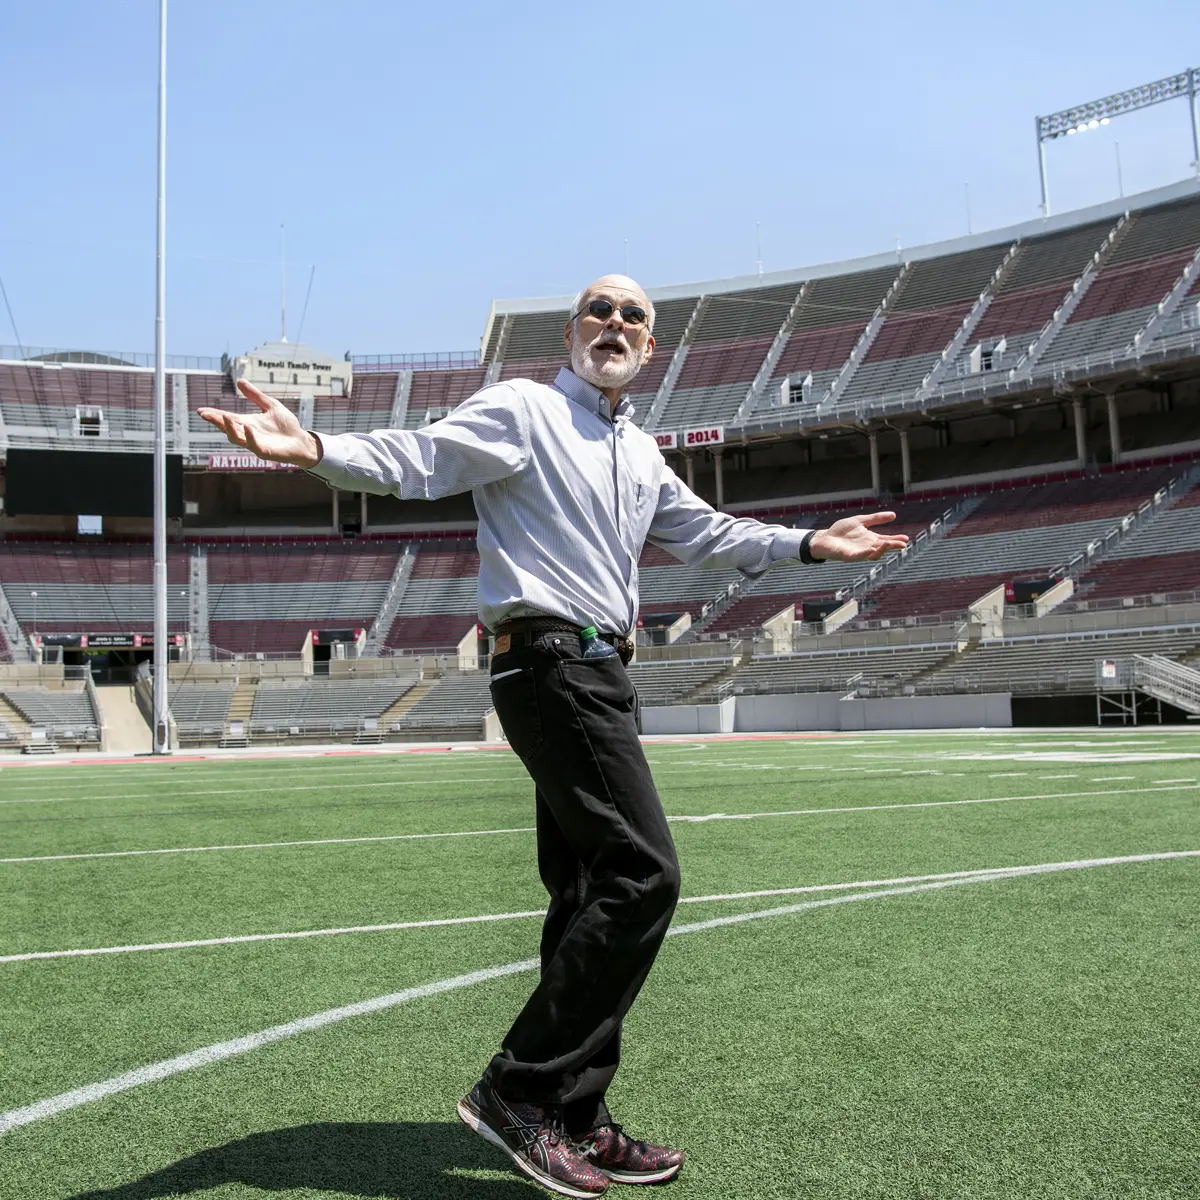 On a sunny day, an older man walking the football field turf of an empty Ohio Stadium spreads his arms wide to expound on a point about the awesomeness of its construction.